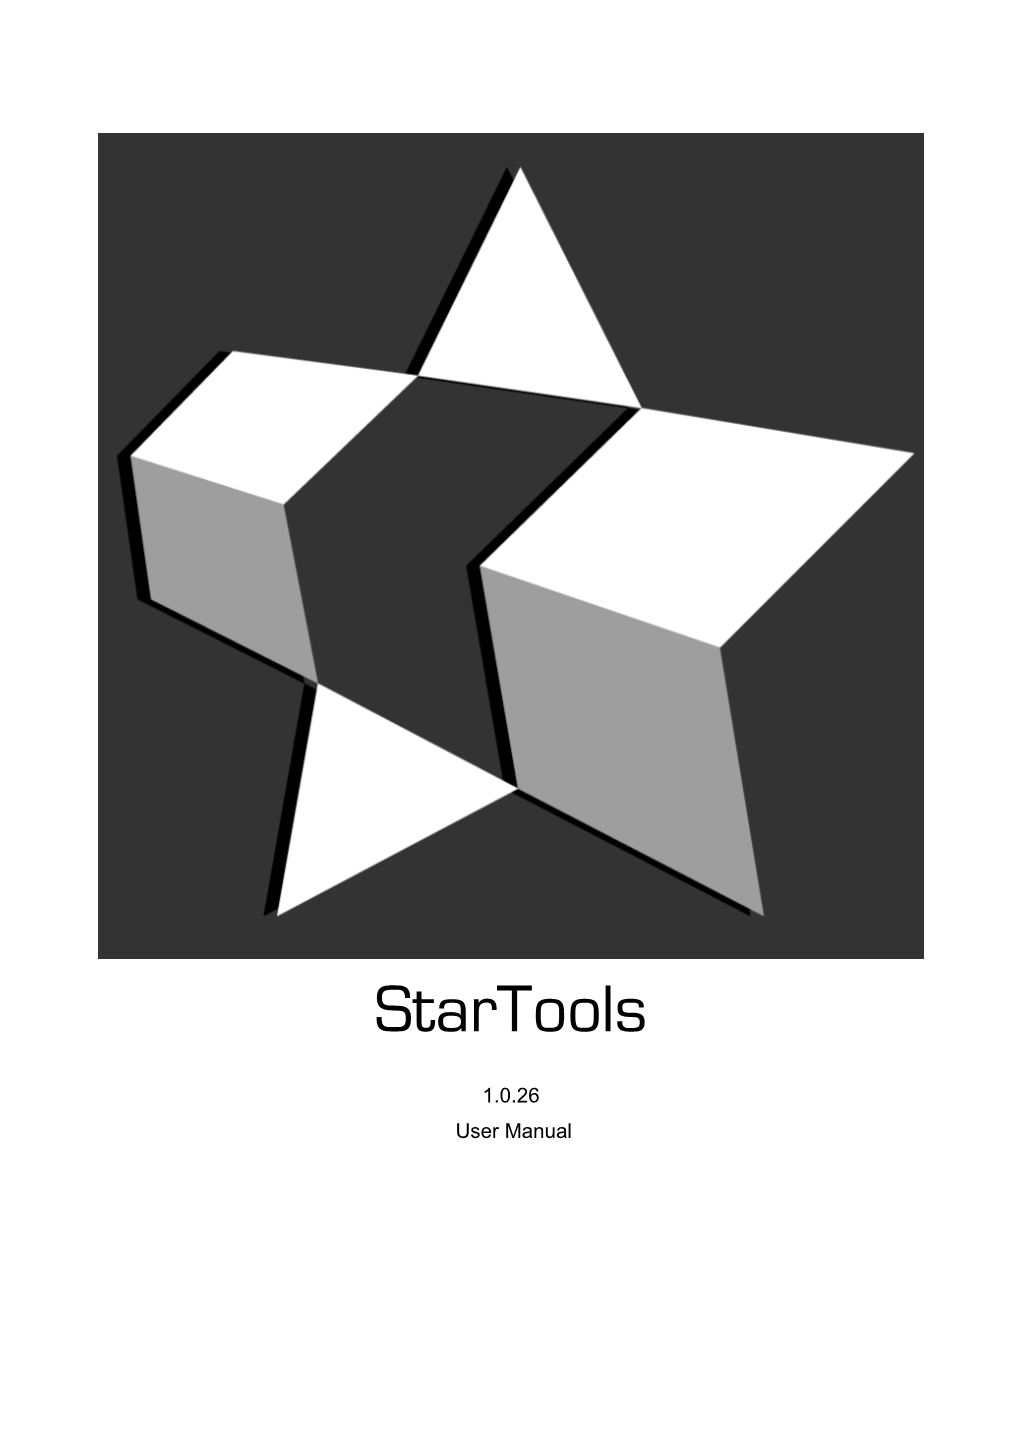 Processing with Startools